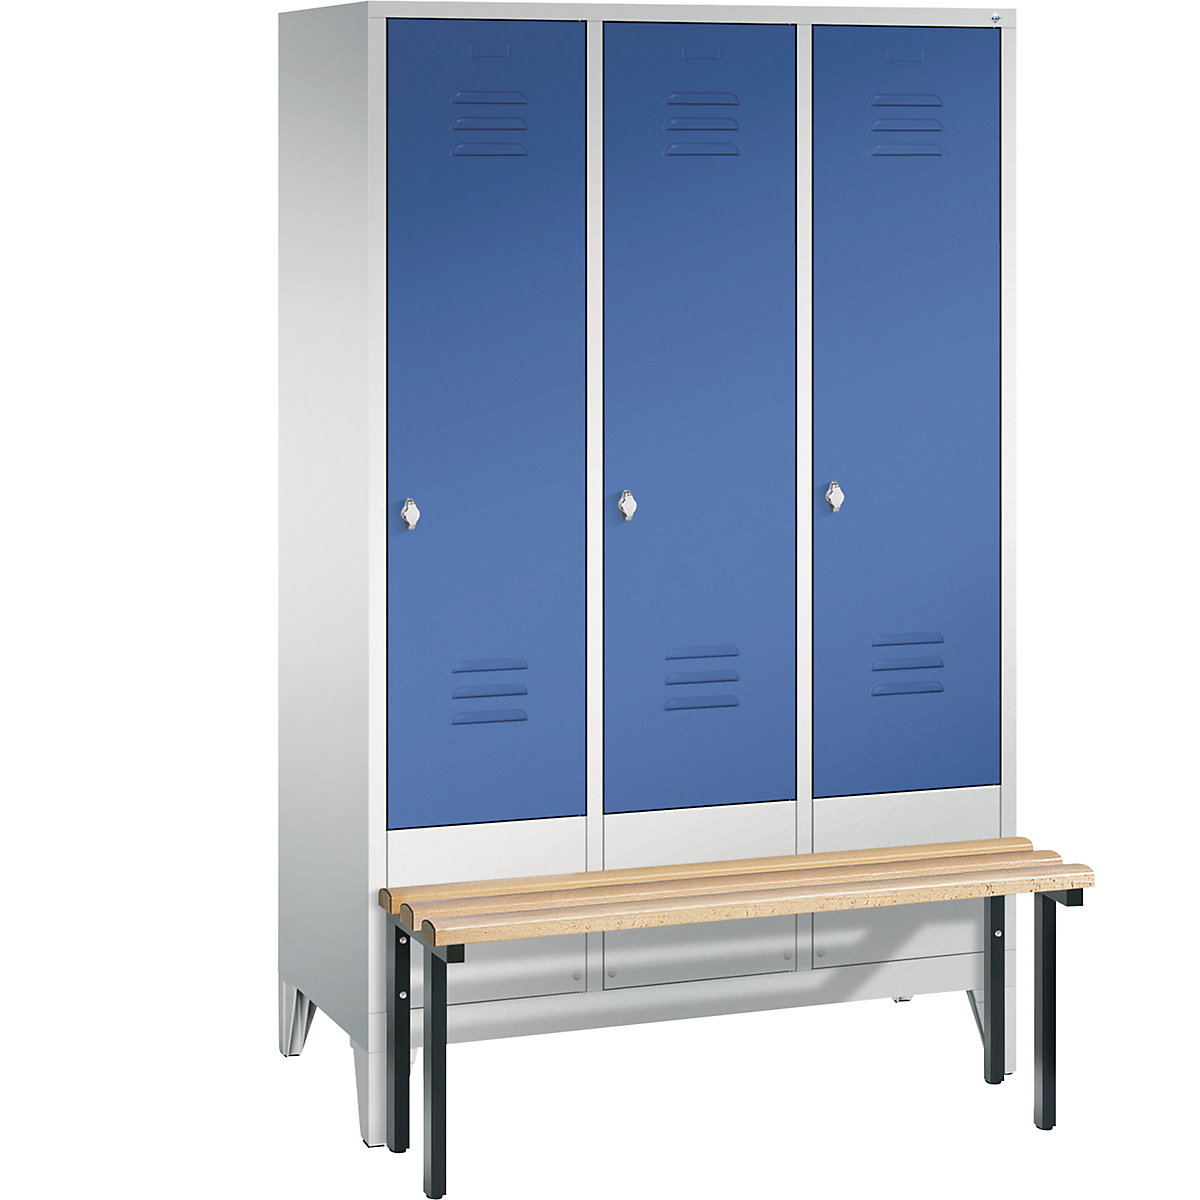 CLASSIC cloakroom locker with bench mounted in front – C+P, 3 compartments, compartment width 400 mm, light grey / gentian blue-2